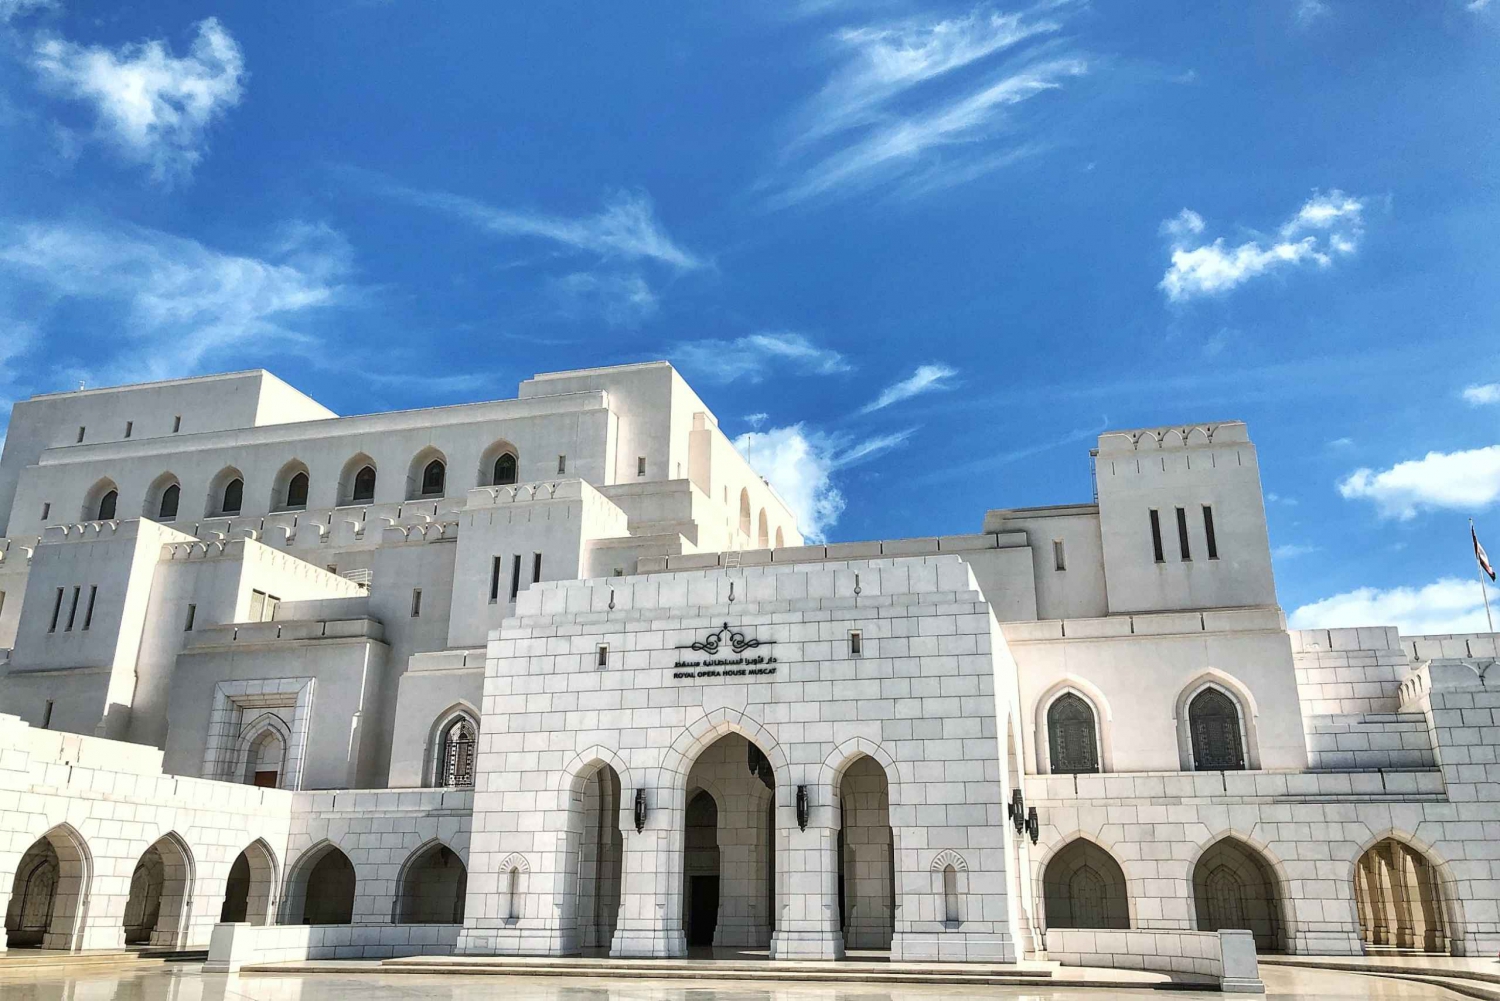 Muscat: Half-Day Guided Tour with Hotel Pickup and Drop-Off